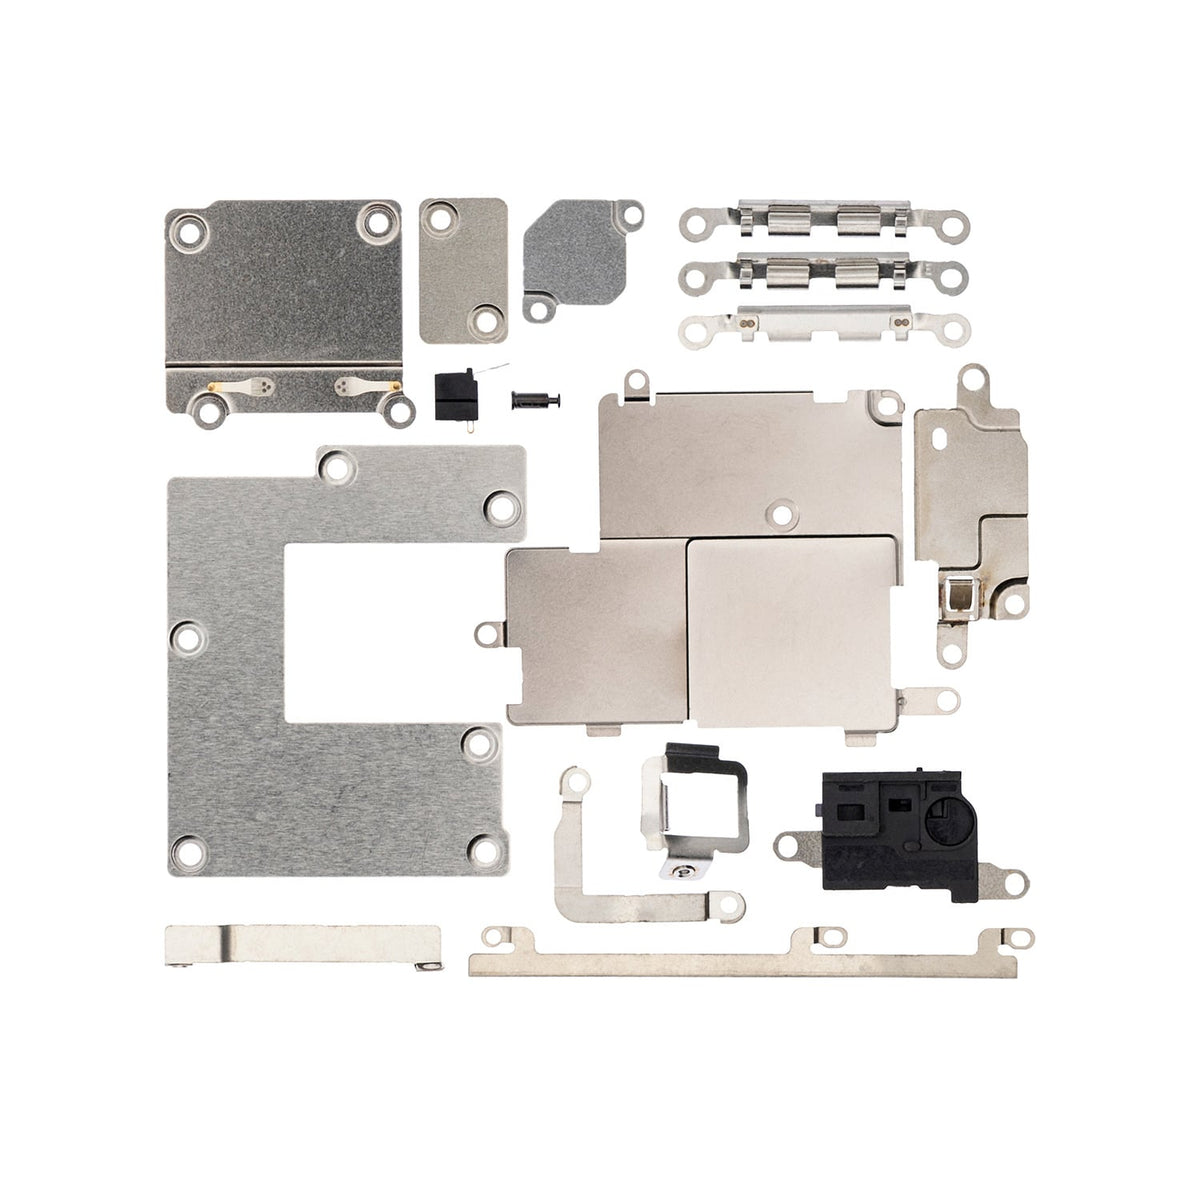 INTERNAL SMALL PARTS FOR IPHONE 11 PRO MAX